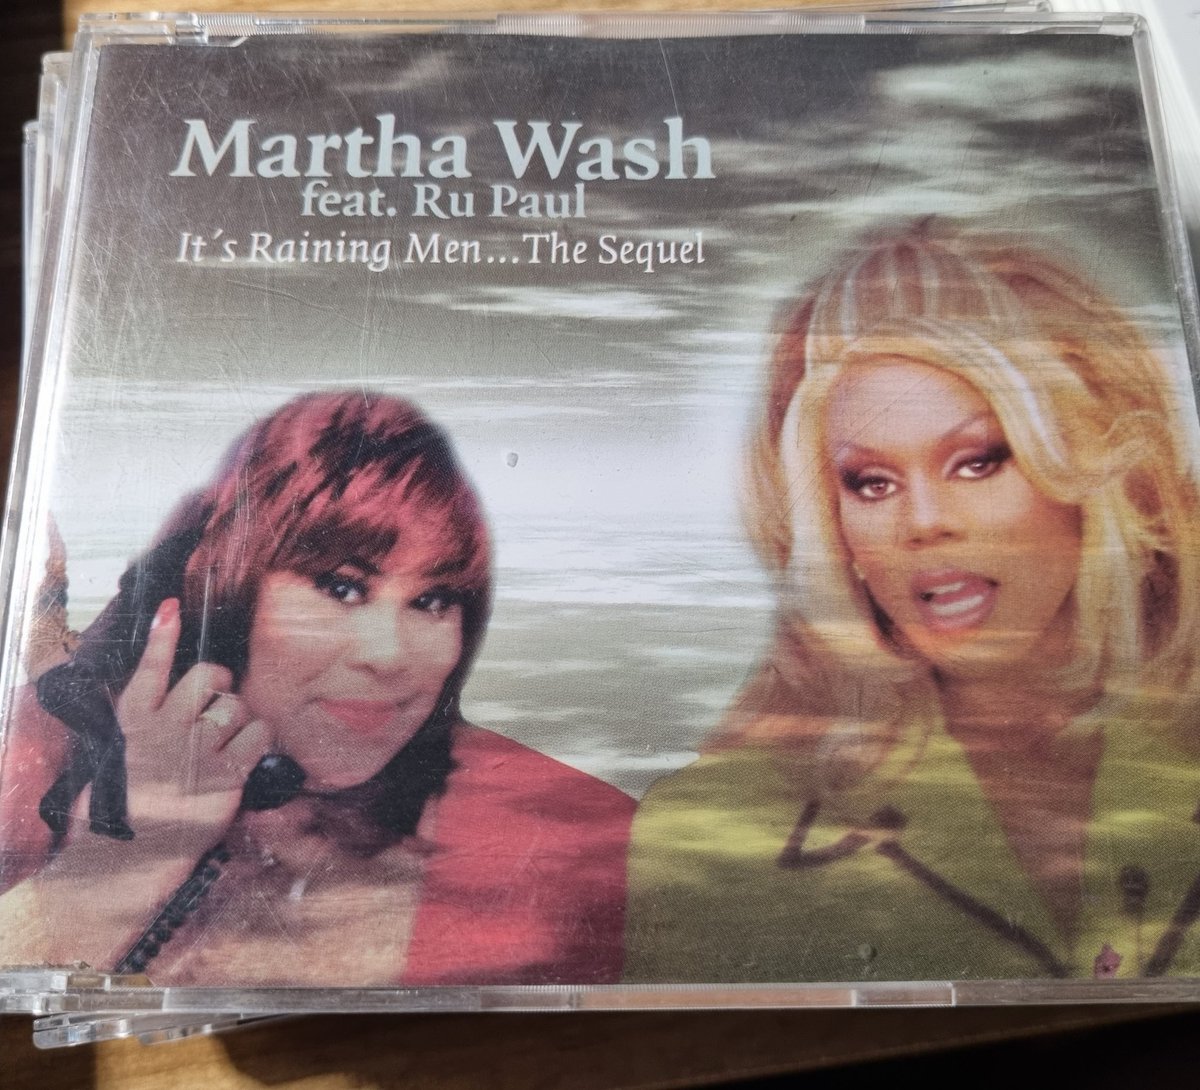 Why isn't this on Spotify? #RuPaul #MarthaWash